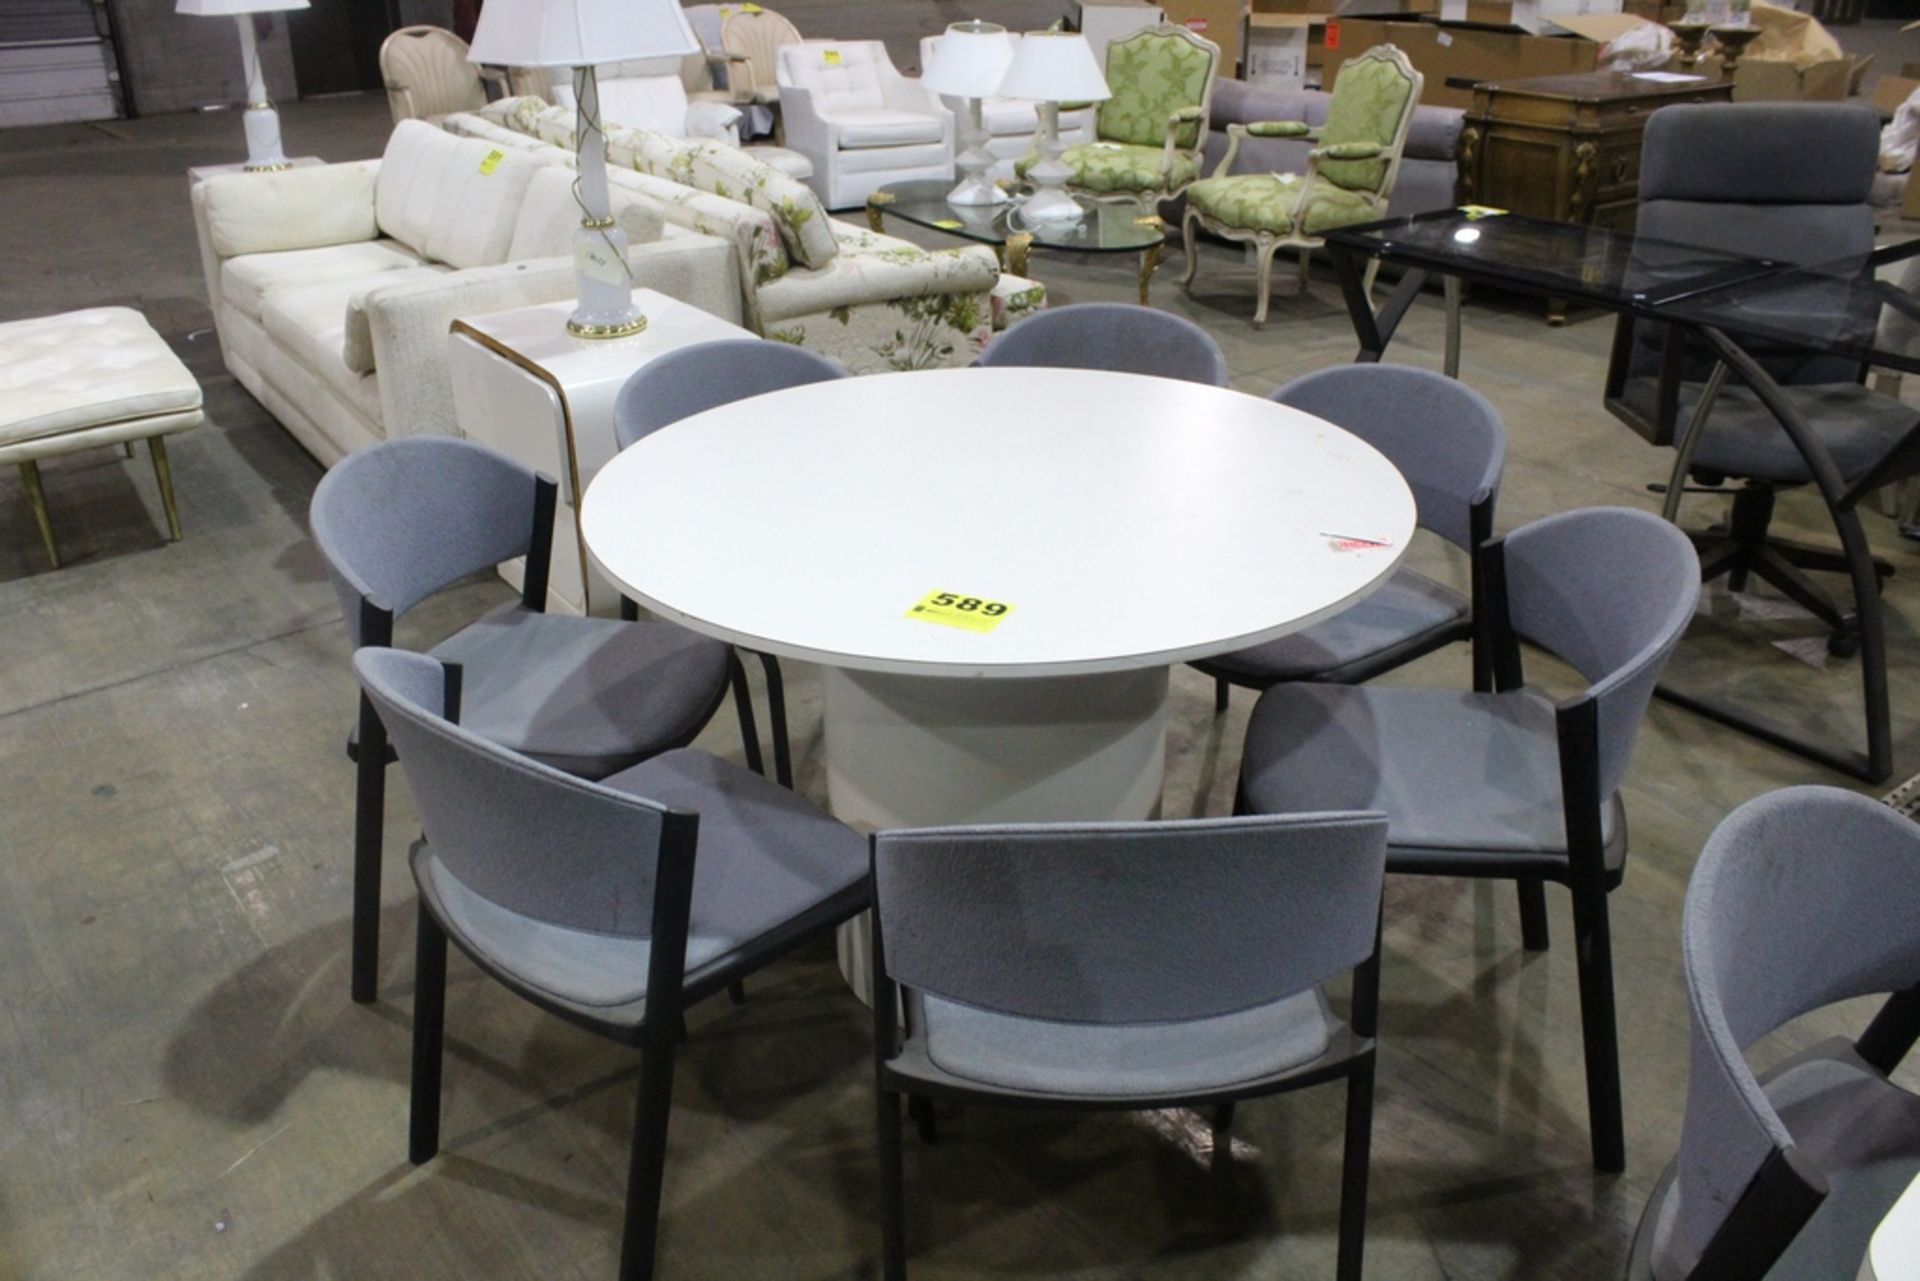 ROUND TABLE, 42" DIA. WITH (7) CHAIRS